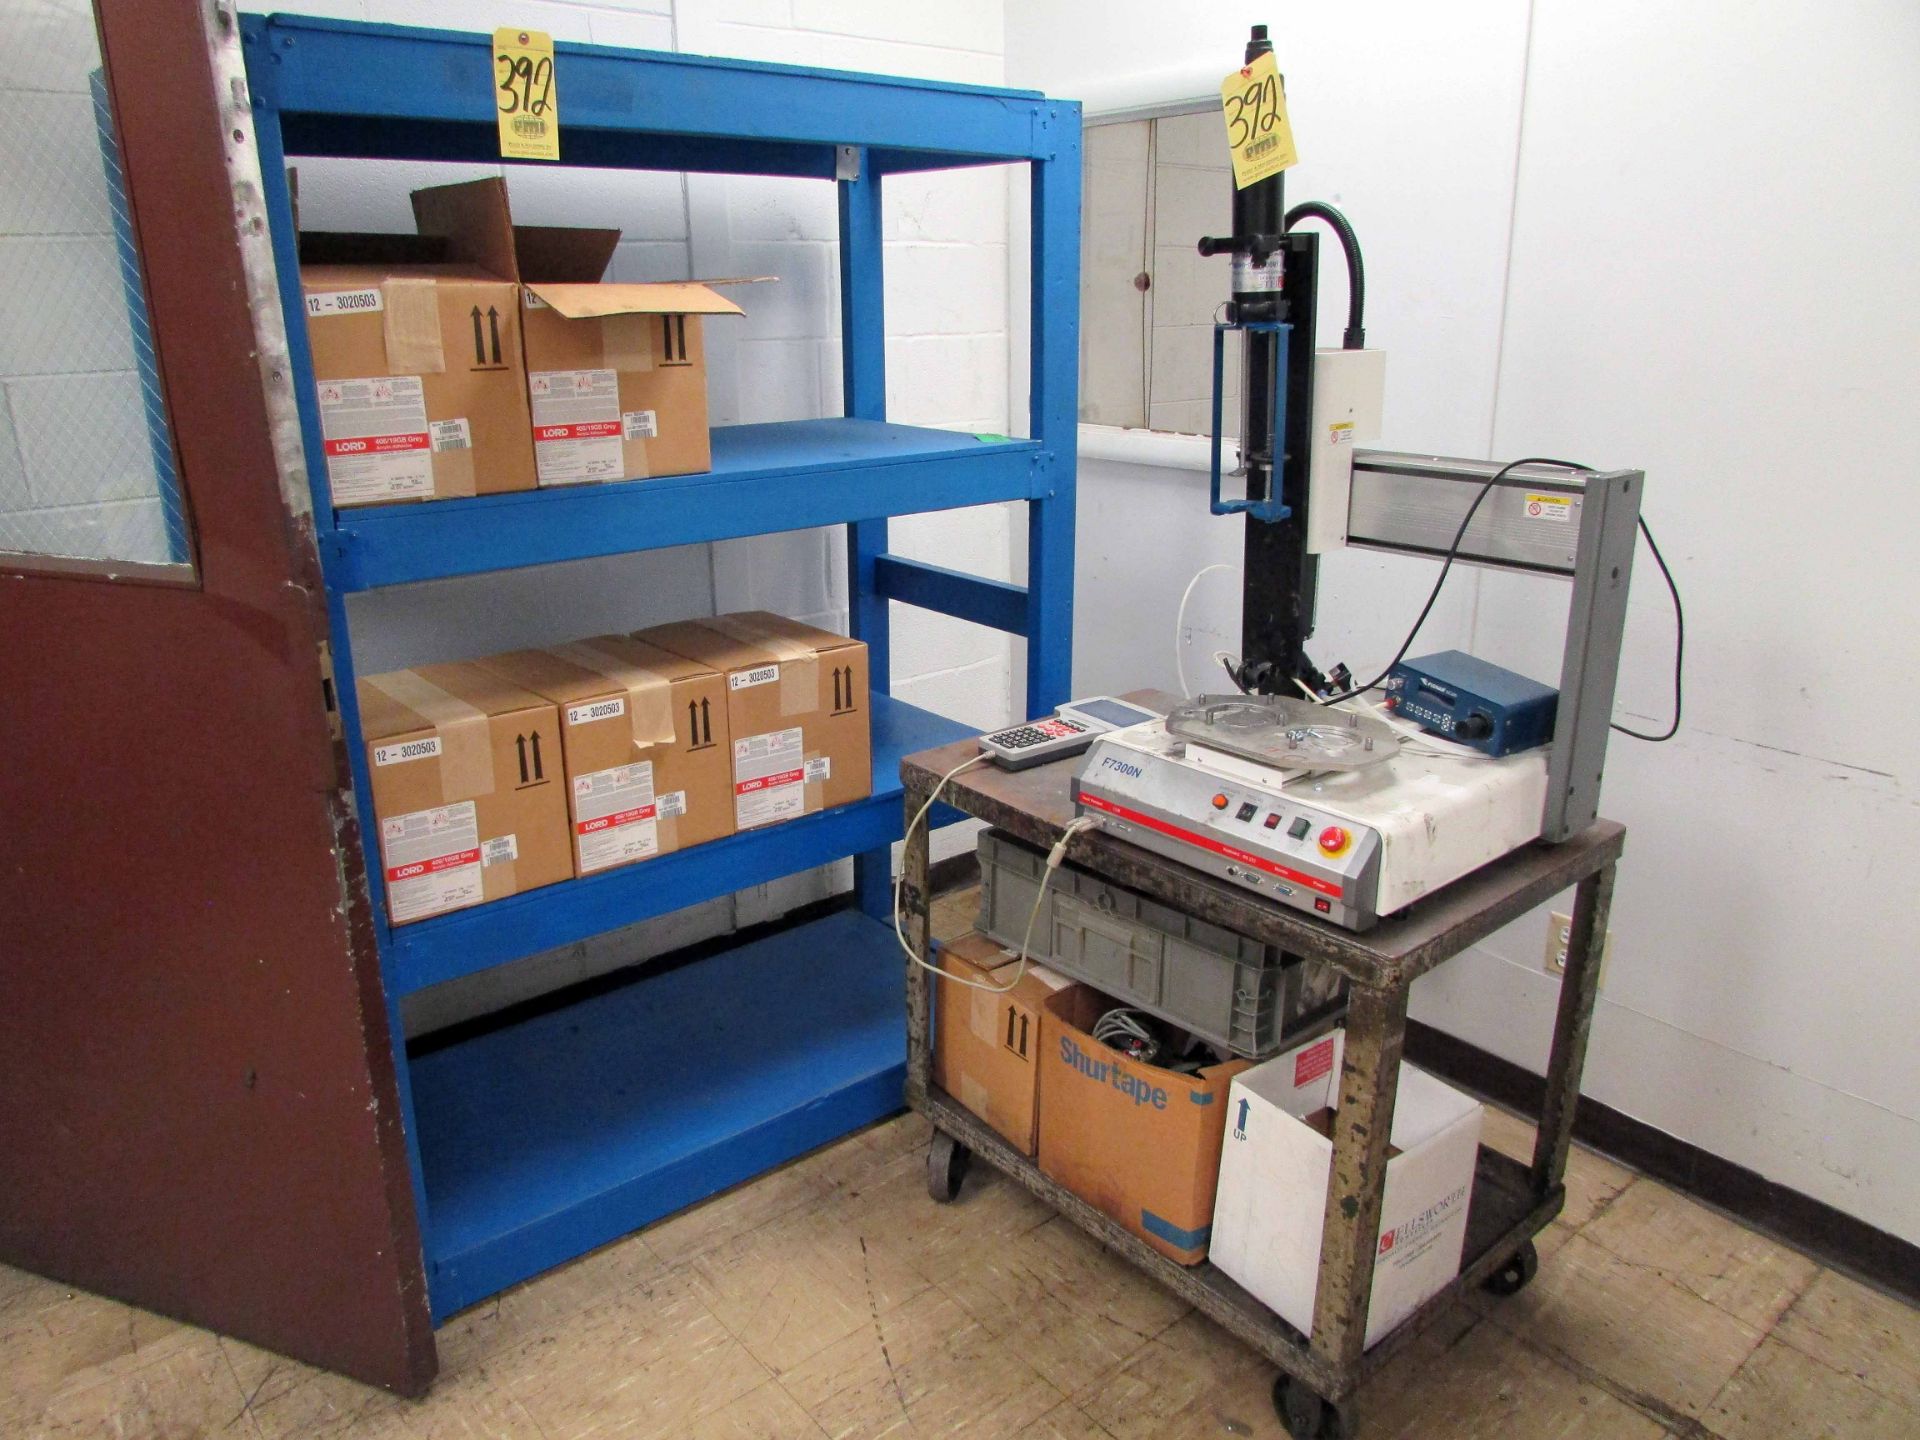 ROBOTIC ADHESIVE APPLICATION MACHINE, FISNAR MDL. F7300N, w/ (5) cases of Lord 406/19GB acrylic